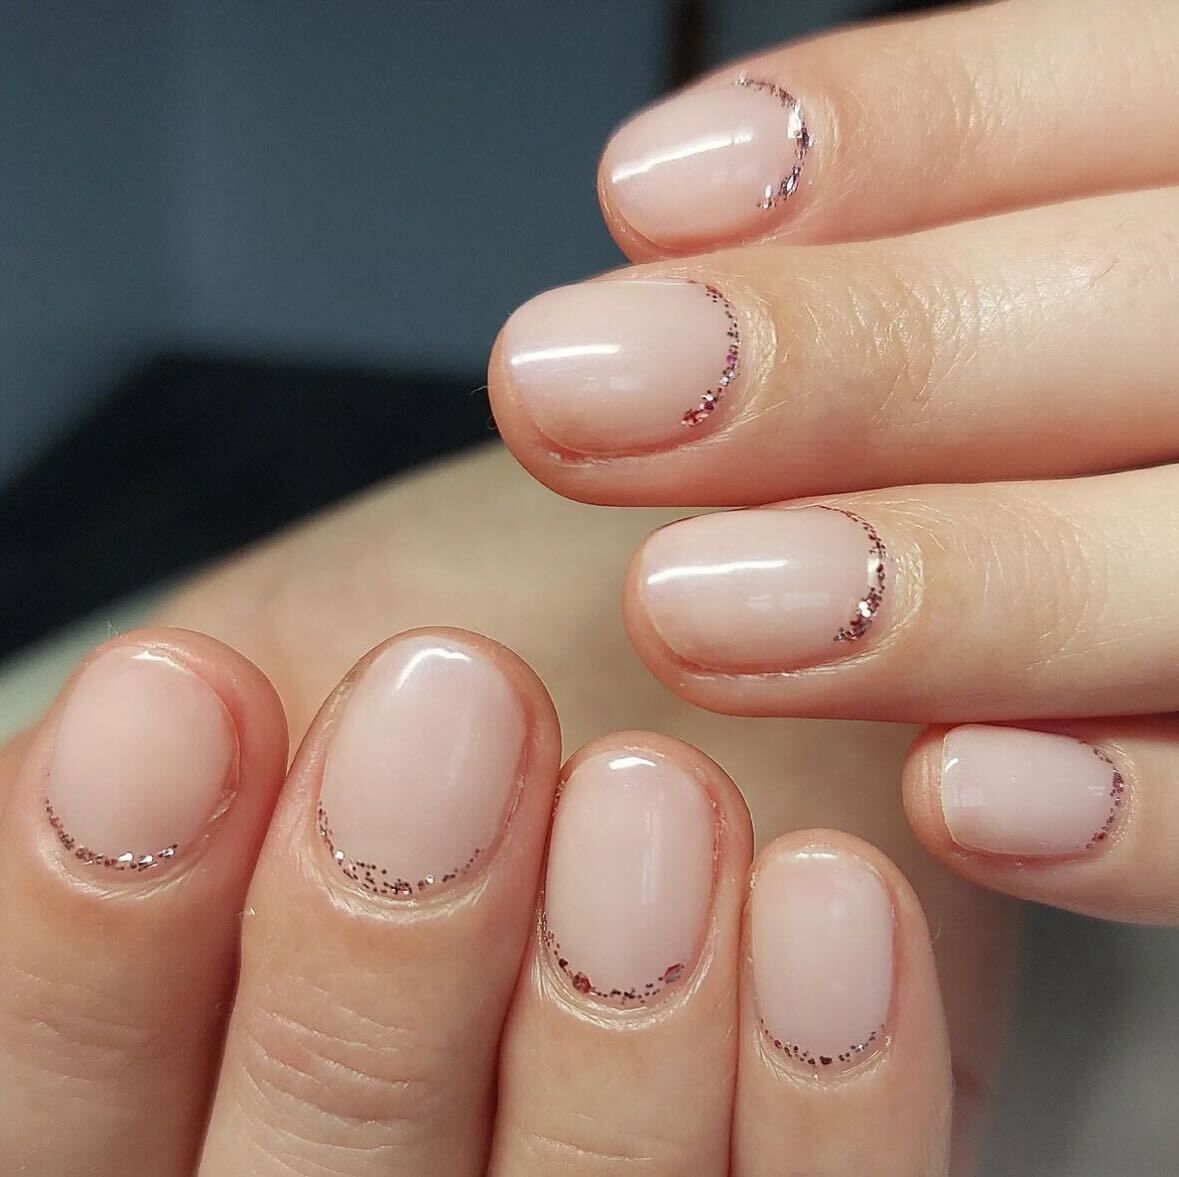 No-Chip Manicure Review and Removal - Sarah Rae Vargas